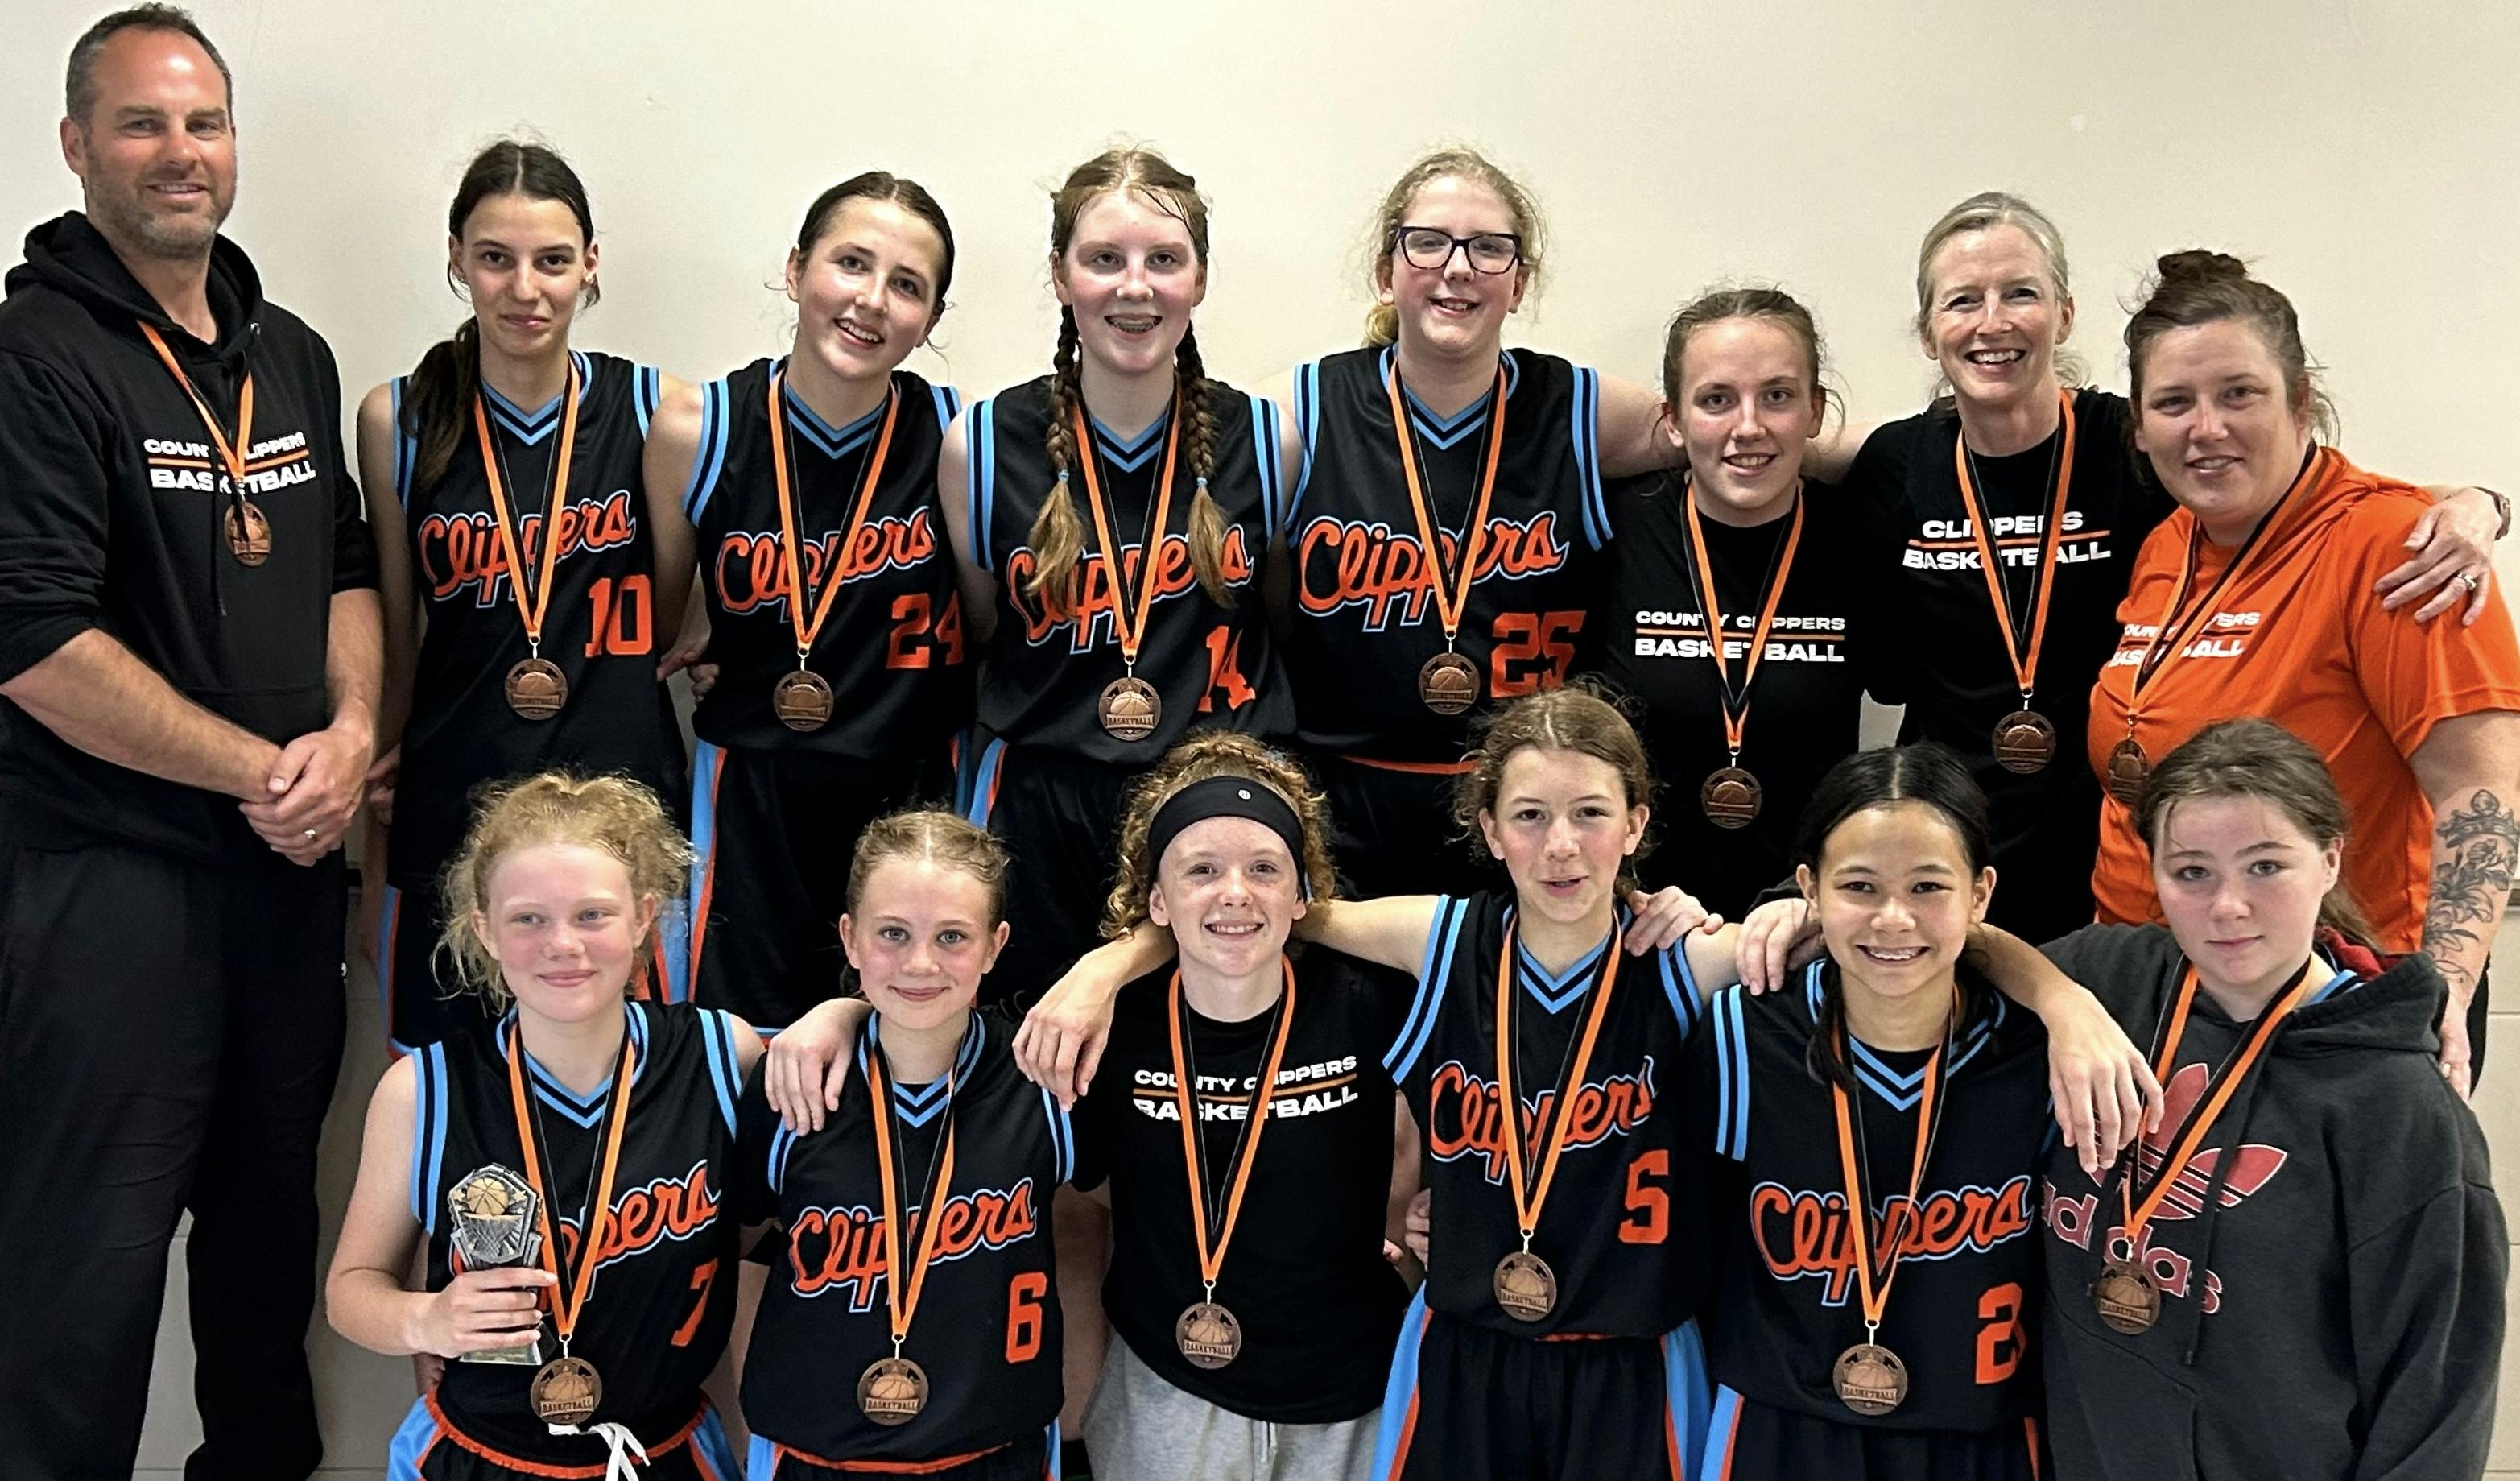 <p>The U14 County Clippers captured the bronze medal at their first annual County Clippers Spring Classic A tournament hosted at PECI April 12-14. Team members include (Front, left to right) Alia Vader, Joni Vader, Jooniper Taylor, Hartley Wallach, Aylie Heffernan, Madelyn Minns<br />
(Back, left to right): Coach Nathan Vader, Camilla Parsons, Remy Dullard-Krizay, Jessica Davis, Audrina Carty, Coach Chloe Lucas, Coach Sam Boardley and Coach Kylie Lucas. (Supplied Photo)</p>
